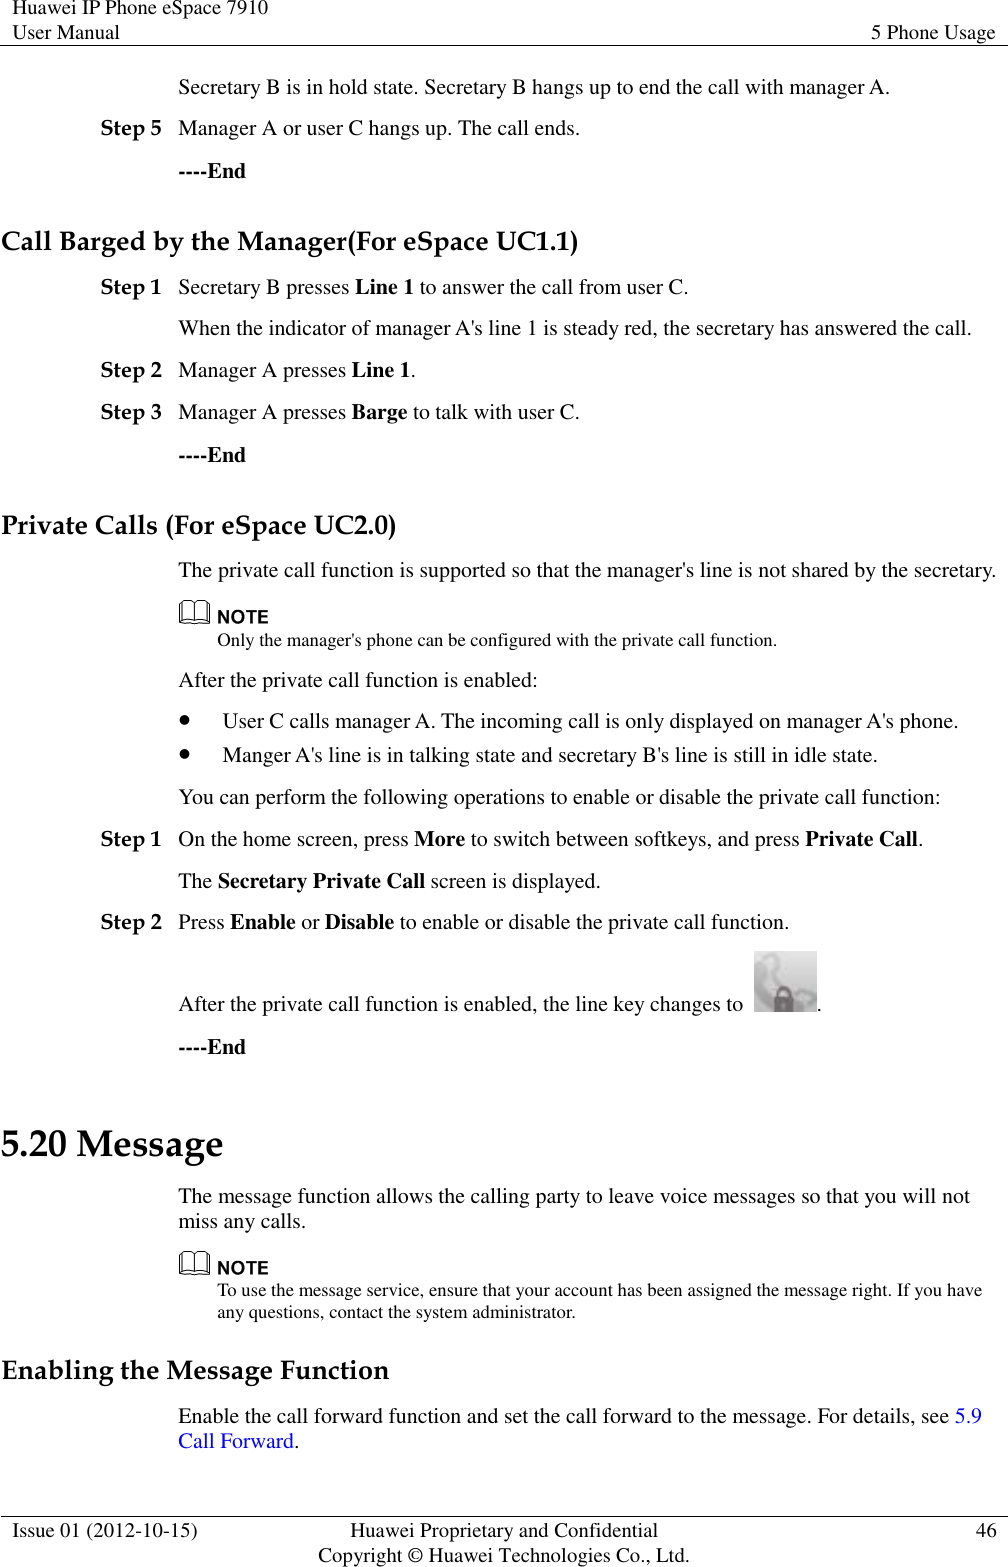 Huawei IP Phone eSpace 7910 User Manual 5 Phone Usage  Issue 01 (2012-10-15) Huawei Proprietary and Confidential                                     Copyright © Huawei Technologies Co., Ltd. 46  Secretary B is in hold state. Secretary B hangs up to end the call with manager A. Step 5 Manager A or user C hangs up. The call ends. ----End Call Barged by the Manager(For eSpace UC1.1) Step 1 Secretary B presses Line 1 to answer the call from user C. When the indicator of manager A&apos;s line 1 is steady red, the secretary has answered the call. Step 2 Manager A presses Line 1. Step 3 Manager A presses Barge to talk with user C. ----End Private Calls (For eSpace UC2.0) The private call function is supported so that the manager&apos;s line is not shared by the secretary.  Only the manager&apos;s phone can be configured with the private call function. After the private call function is enabled:  User C calls manager A. The incoming call is only displayed on manager A&apos;s phone.  Manger A&apos;s line is in talking state and secretary B&apos;s line is still in idle state. You can perform the following operations to enable or disable the private call function: Step 1 On the home screen, press More to switch between softkeys, and press Private Call. The Secretary Private Call screen is displayed. Step 2 Press Enable or Disable to enable or disable the private call function. After the private call function is enabled, the line key changes to  . ----End 5.20 Message The message function allows the calling party to leave voice messages so that you will not miss any calls.  To use the message service, ensure that your account has been assigned the message right. If you have any questions, contact the system administrator. Enabling the Message Function Enable the call forward function and set the call forward to the message. For details, see 5.9 Call Forward. 